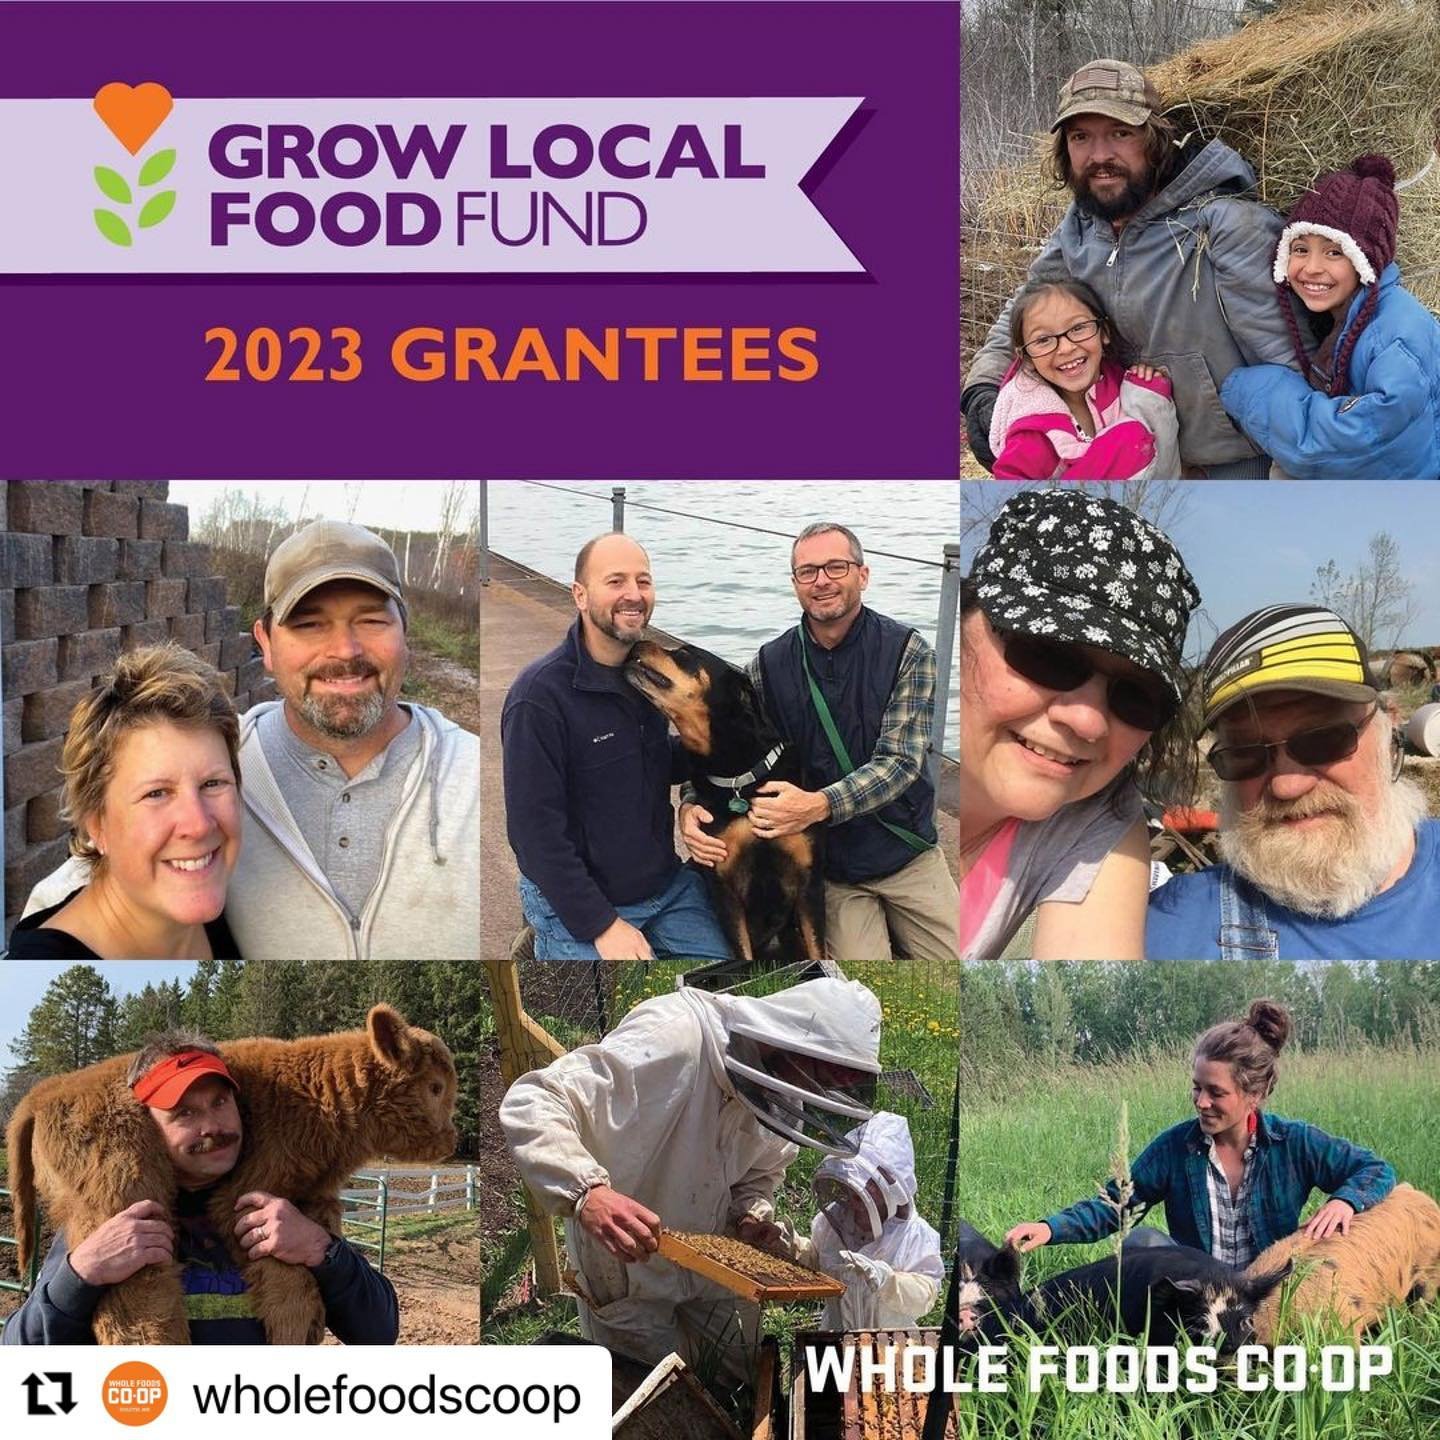 Small local farmers are the heart of the food system, and they also play an essential role in land stewardship. One way you can support local farmers is by shopping at your nearest co-op. When you do, you&rsquo;re supporting community giving programs